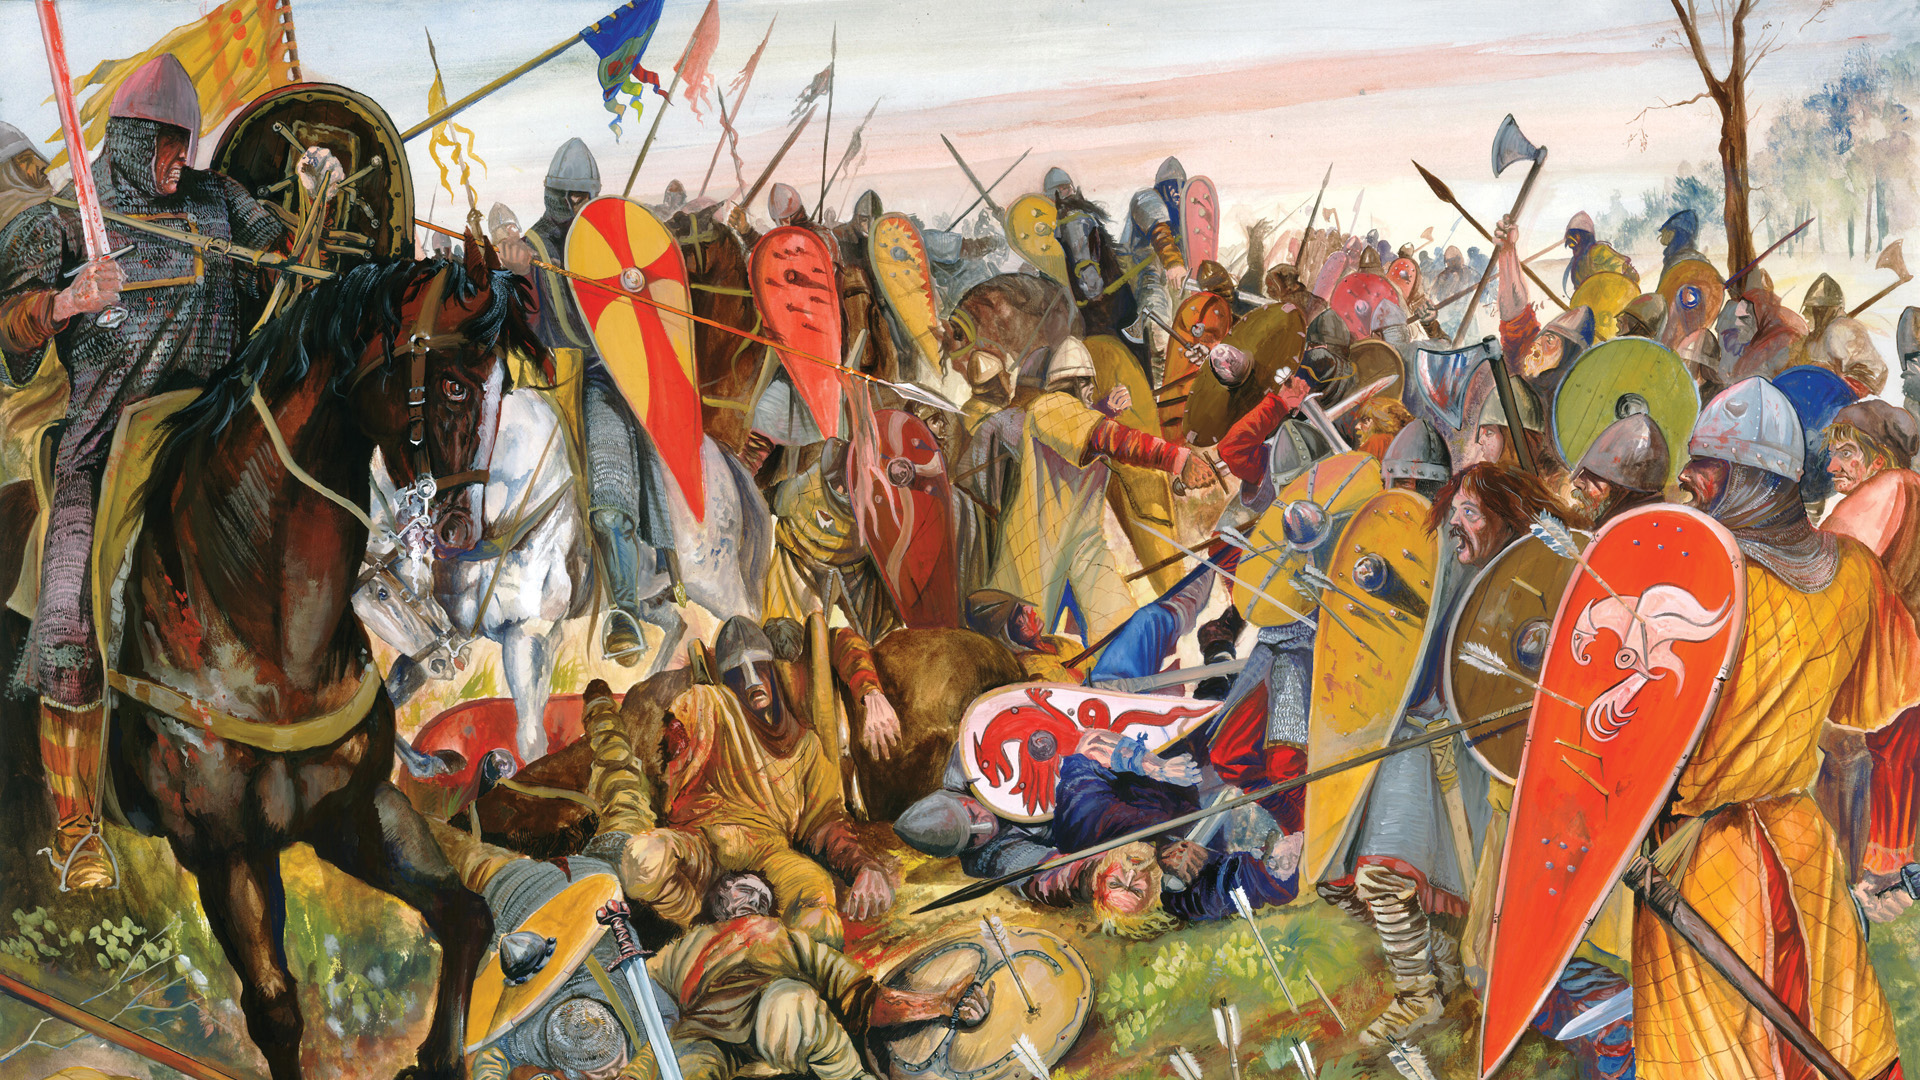 Harold I, Norman Conquest, Battle of Hastings & Saxon King